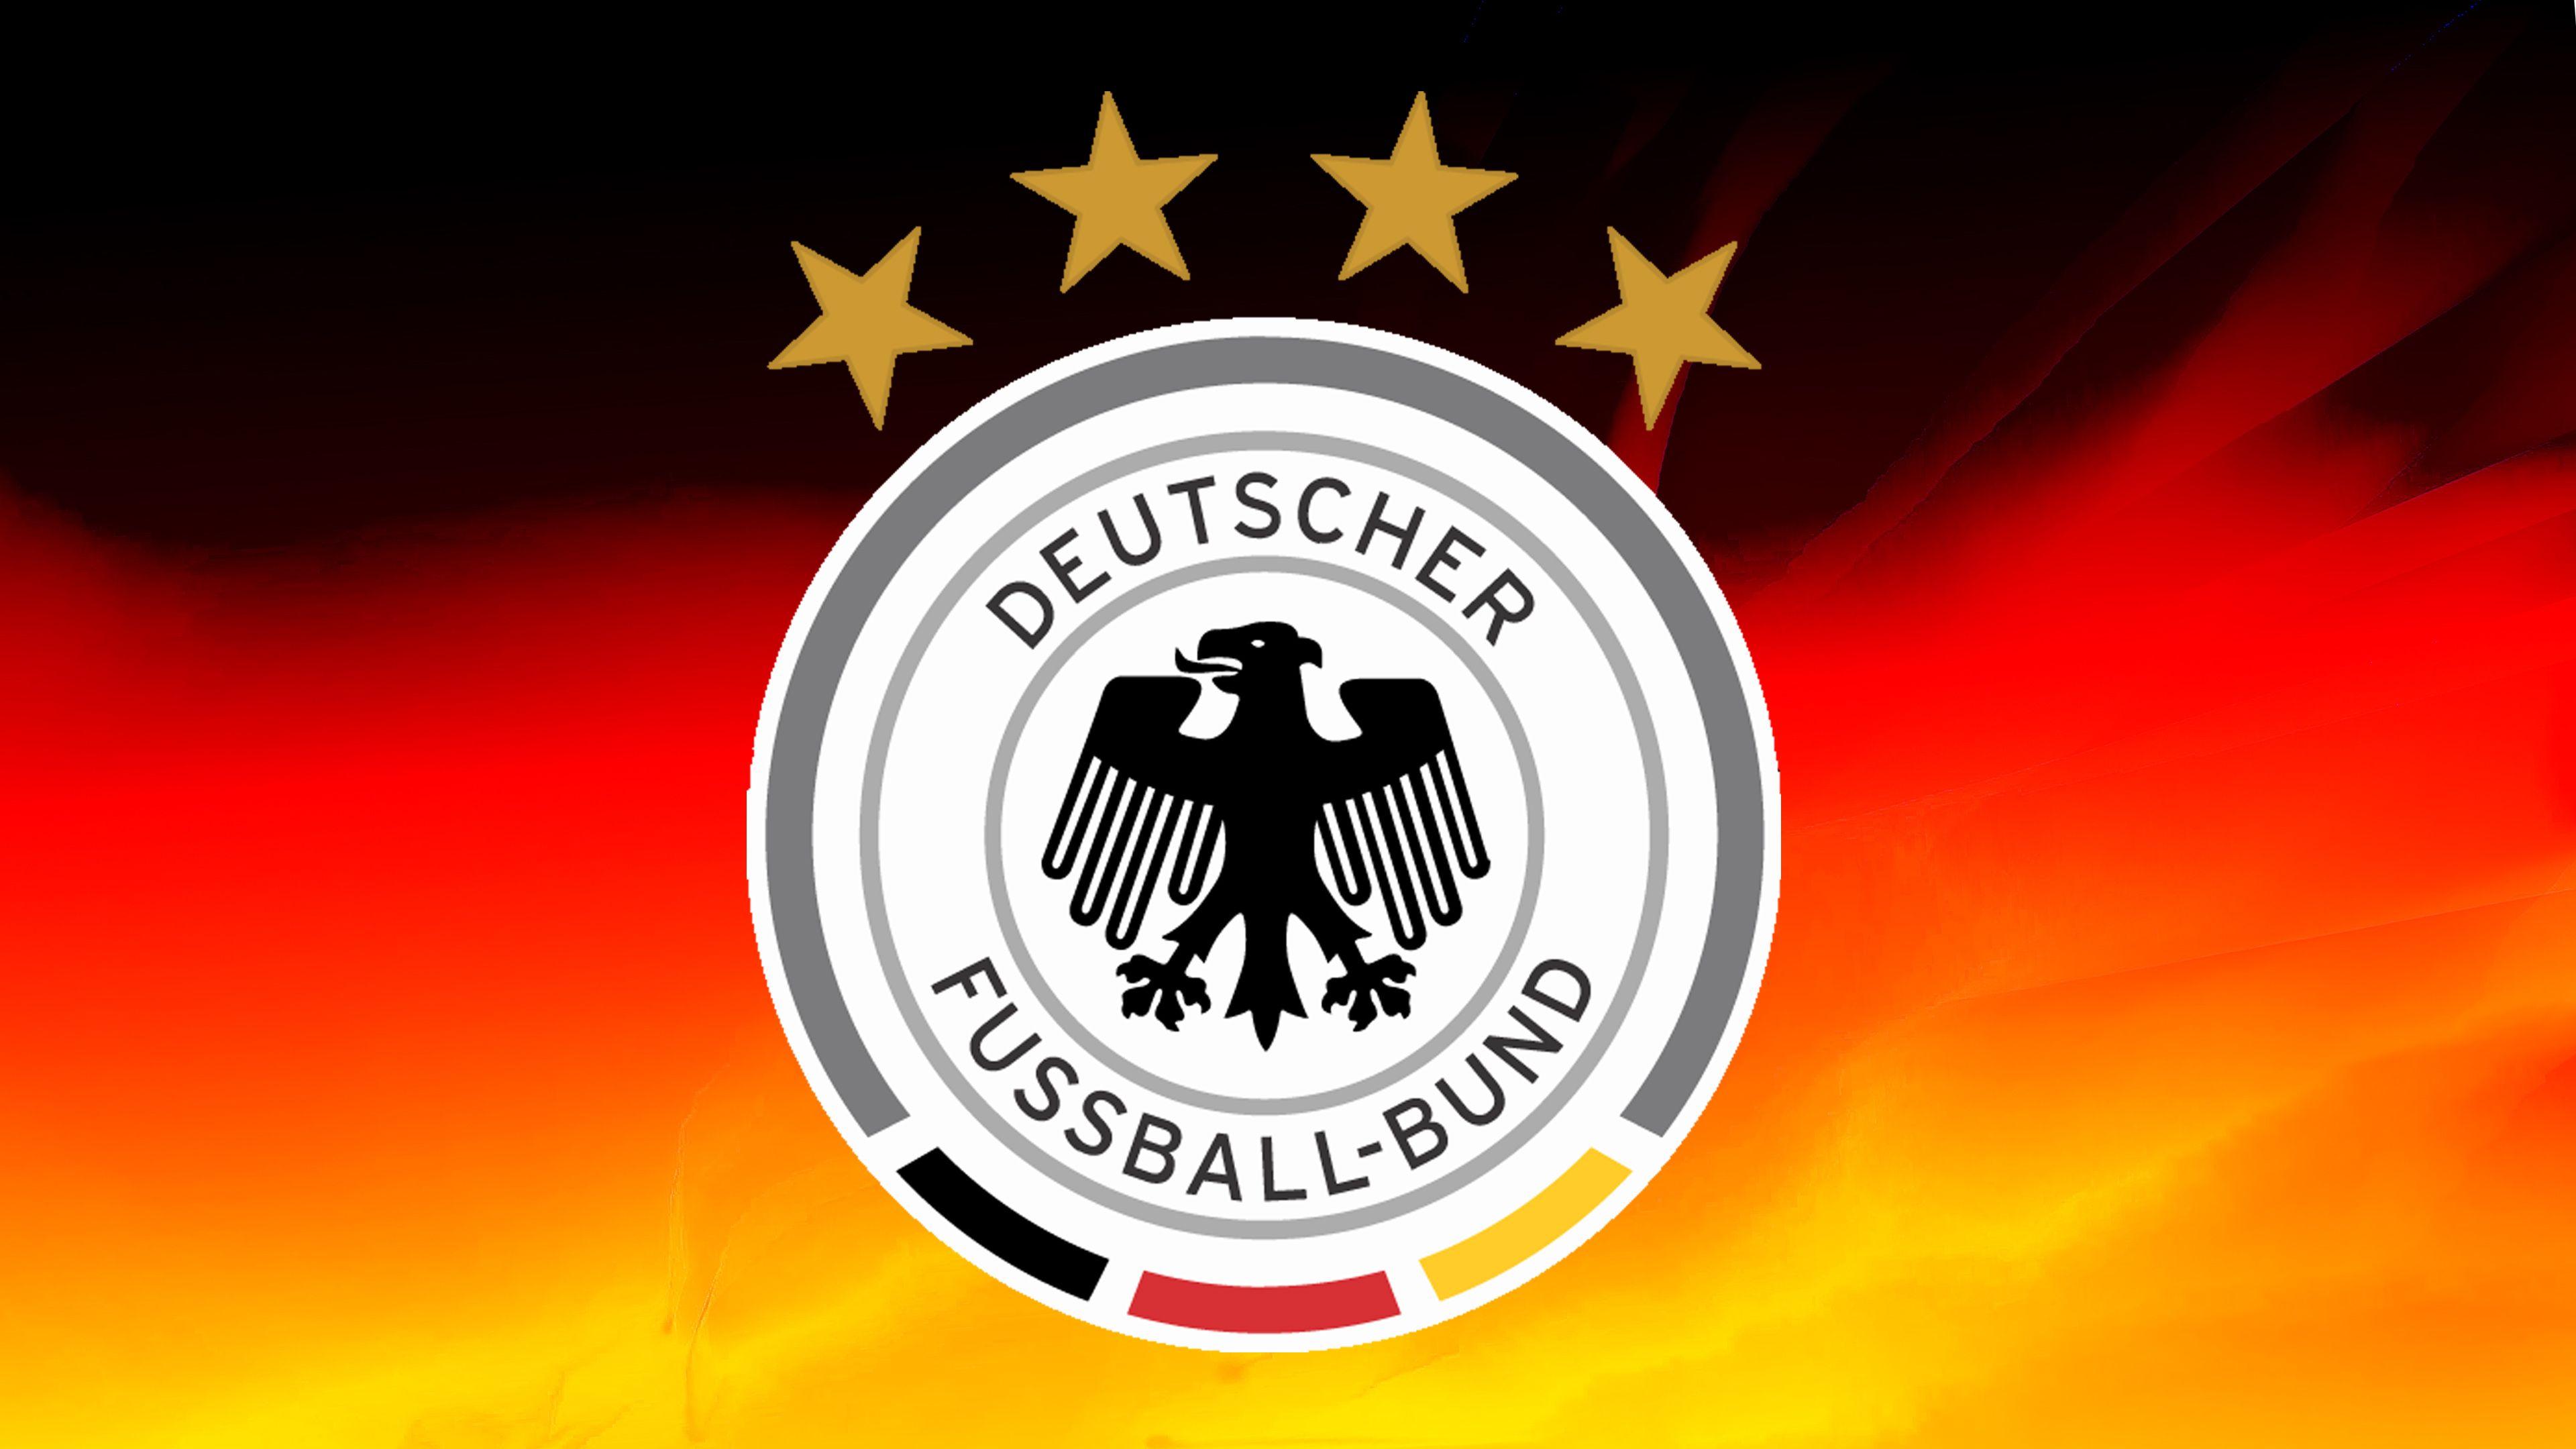 Deutschland Logo - Germany Football Logo Wallpaper with 4 Stars and National Flag